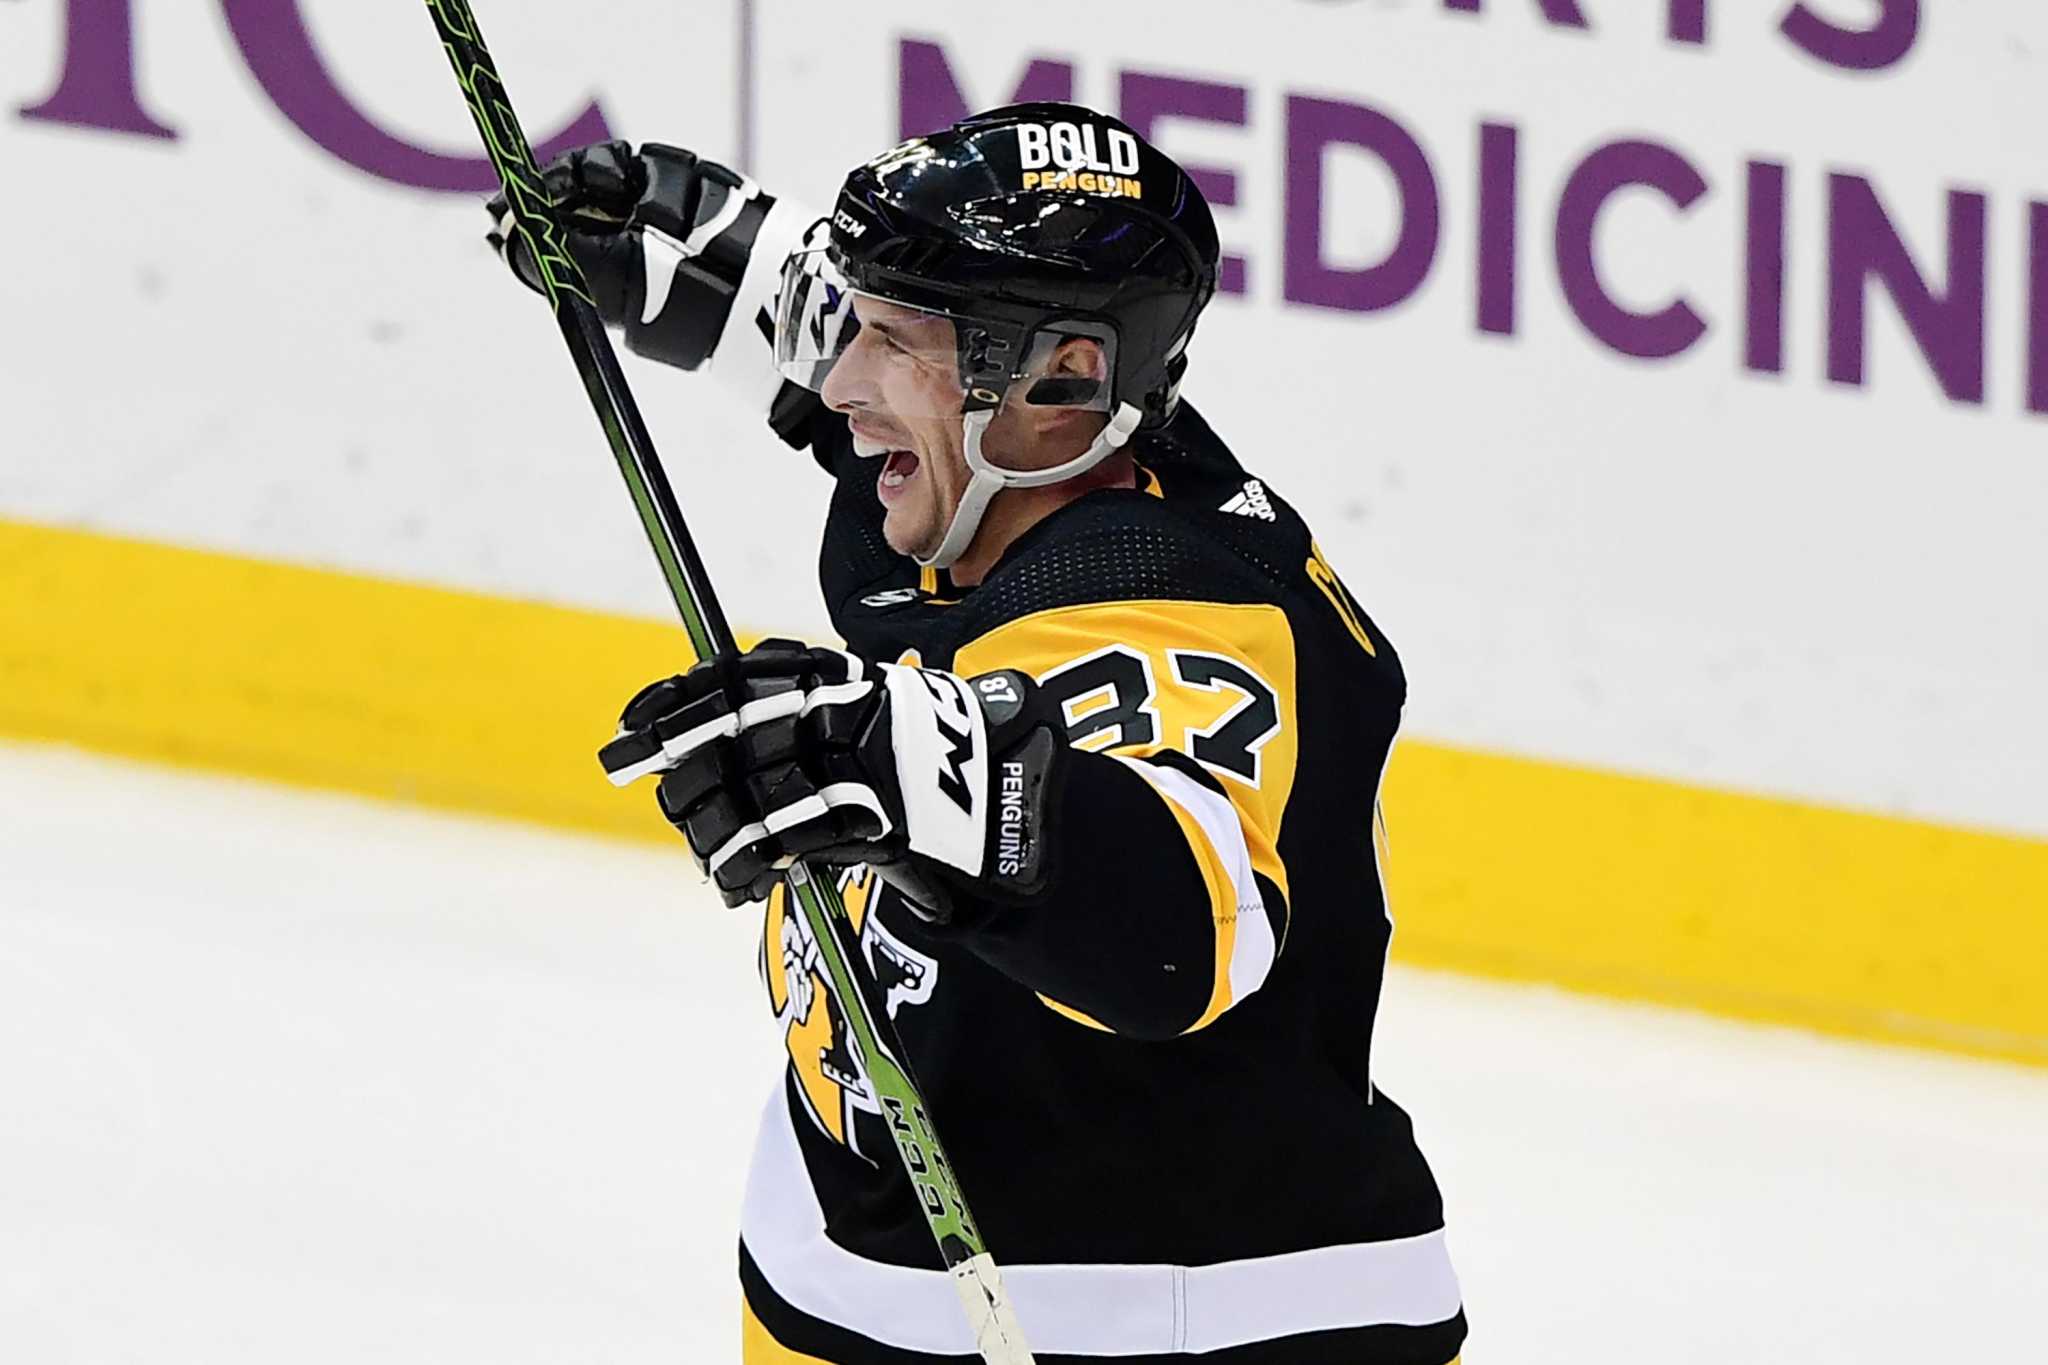 Kris Letang fo the Pittsburgh Penguins celebrates his power play goal  News Photo - Getty Images